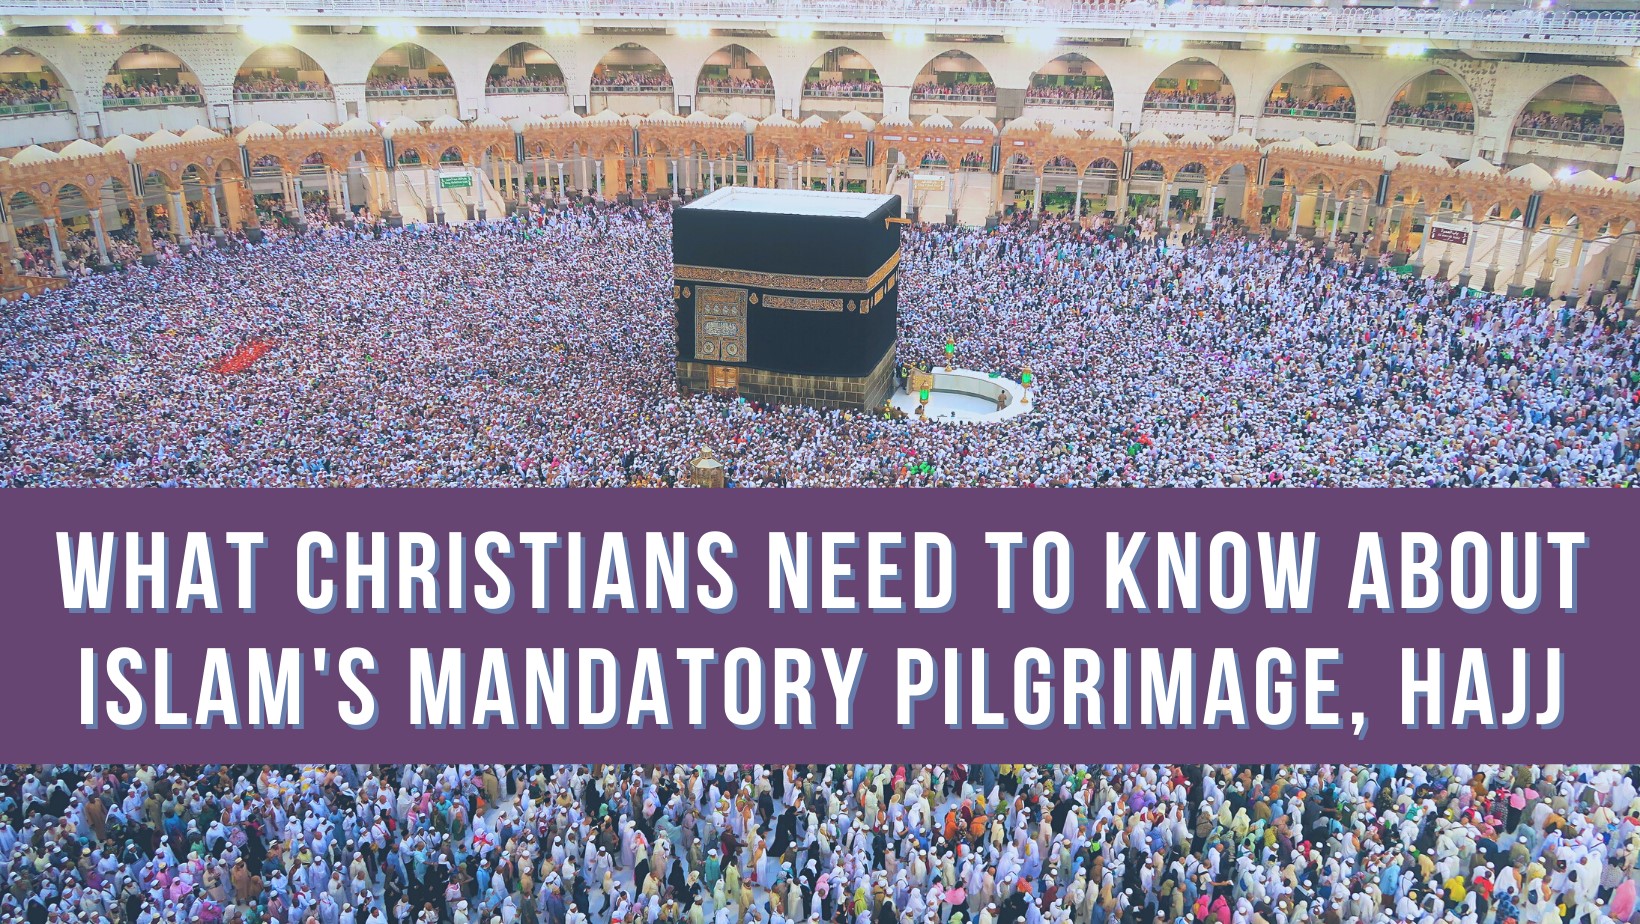 What Christians need to know about Islam's mandatory pilgrimage, Hajj